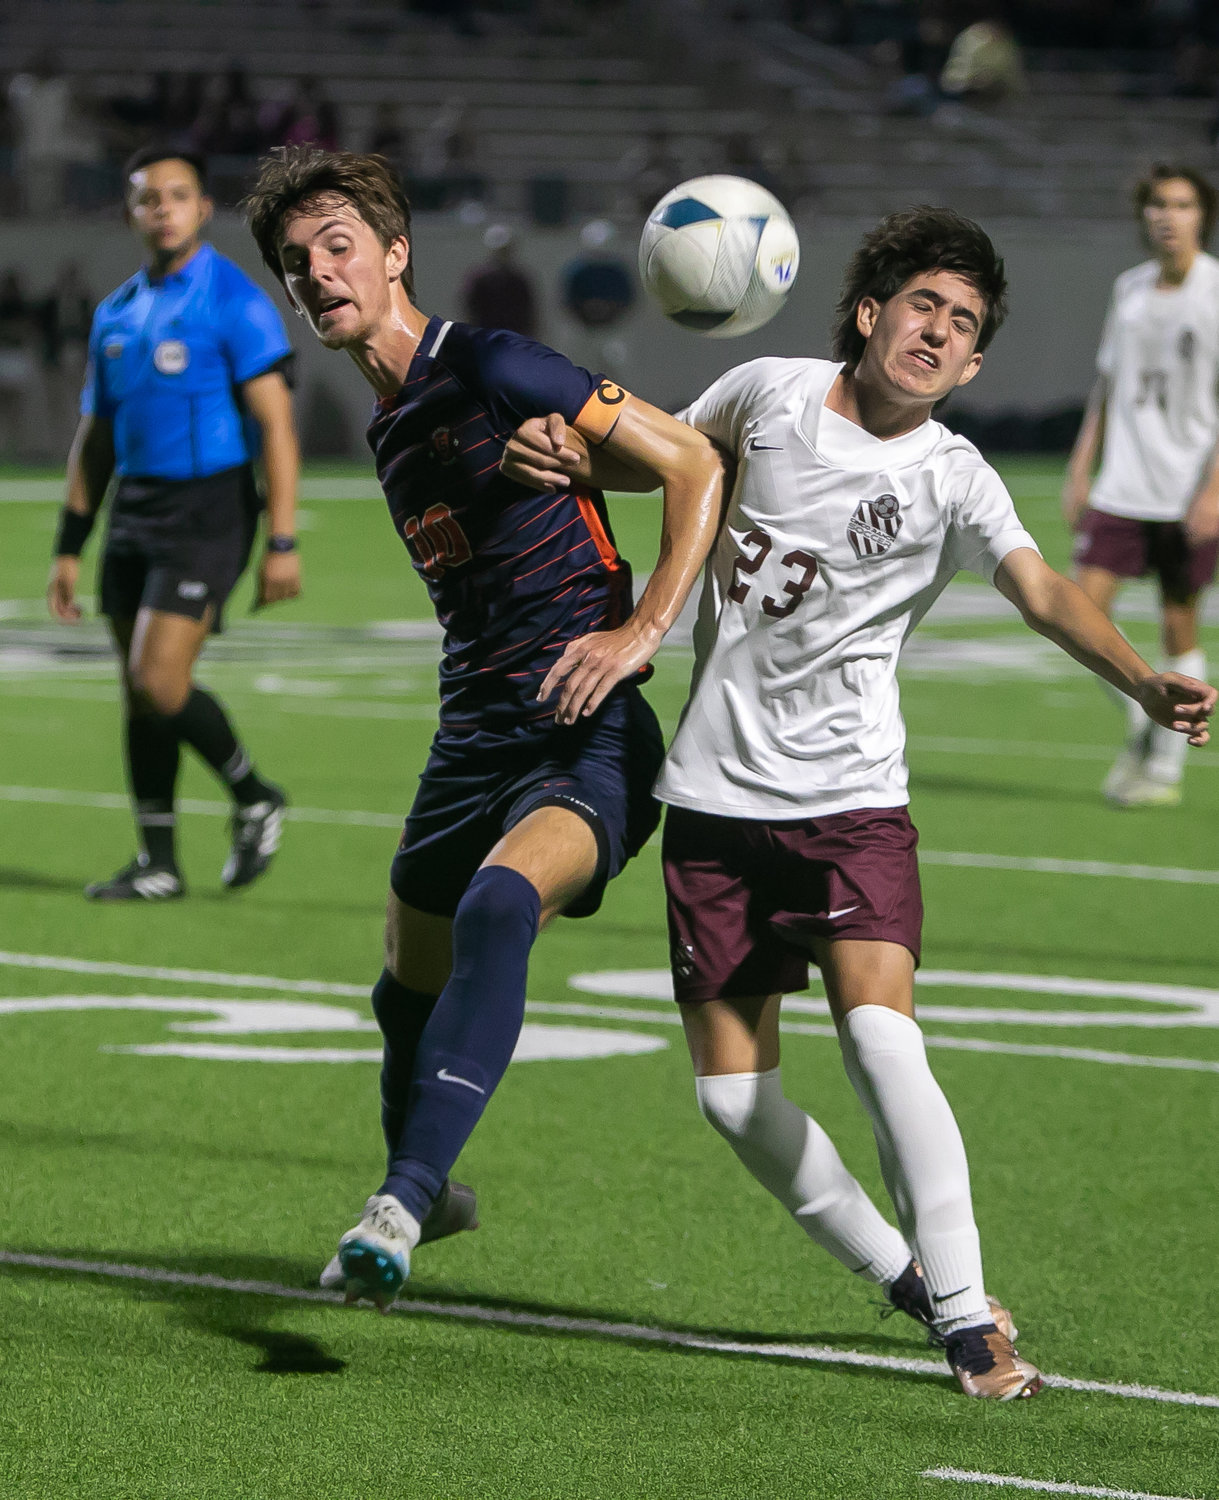 Aidan Morrison and Noah Bosso fight to bring down a ball during Friday's Class 6A Regional Quarterfinal game between Seven Lakes and Cinco Ranch at Legacy Stadium.